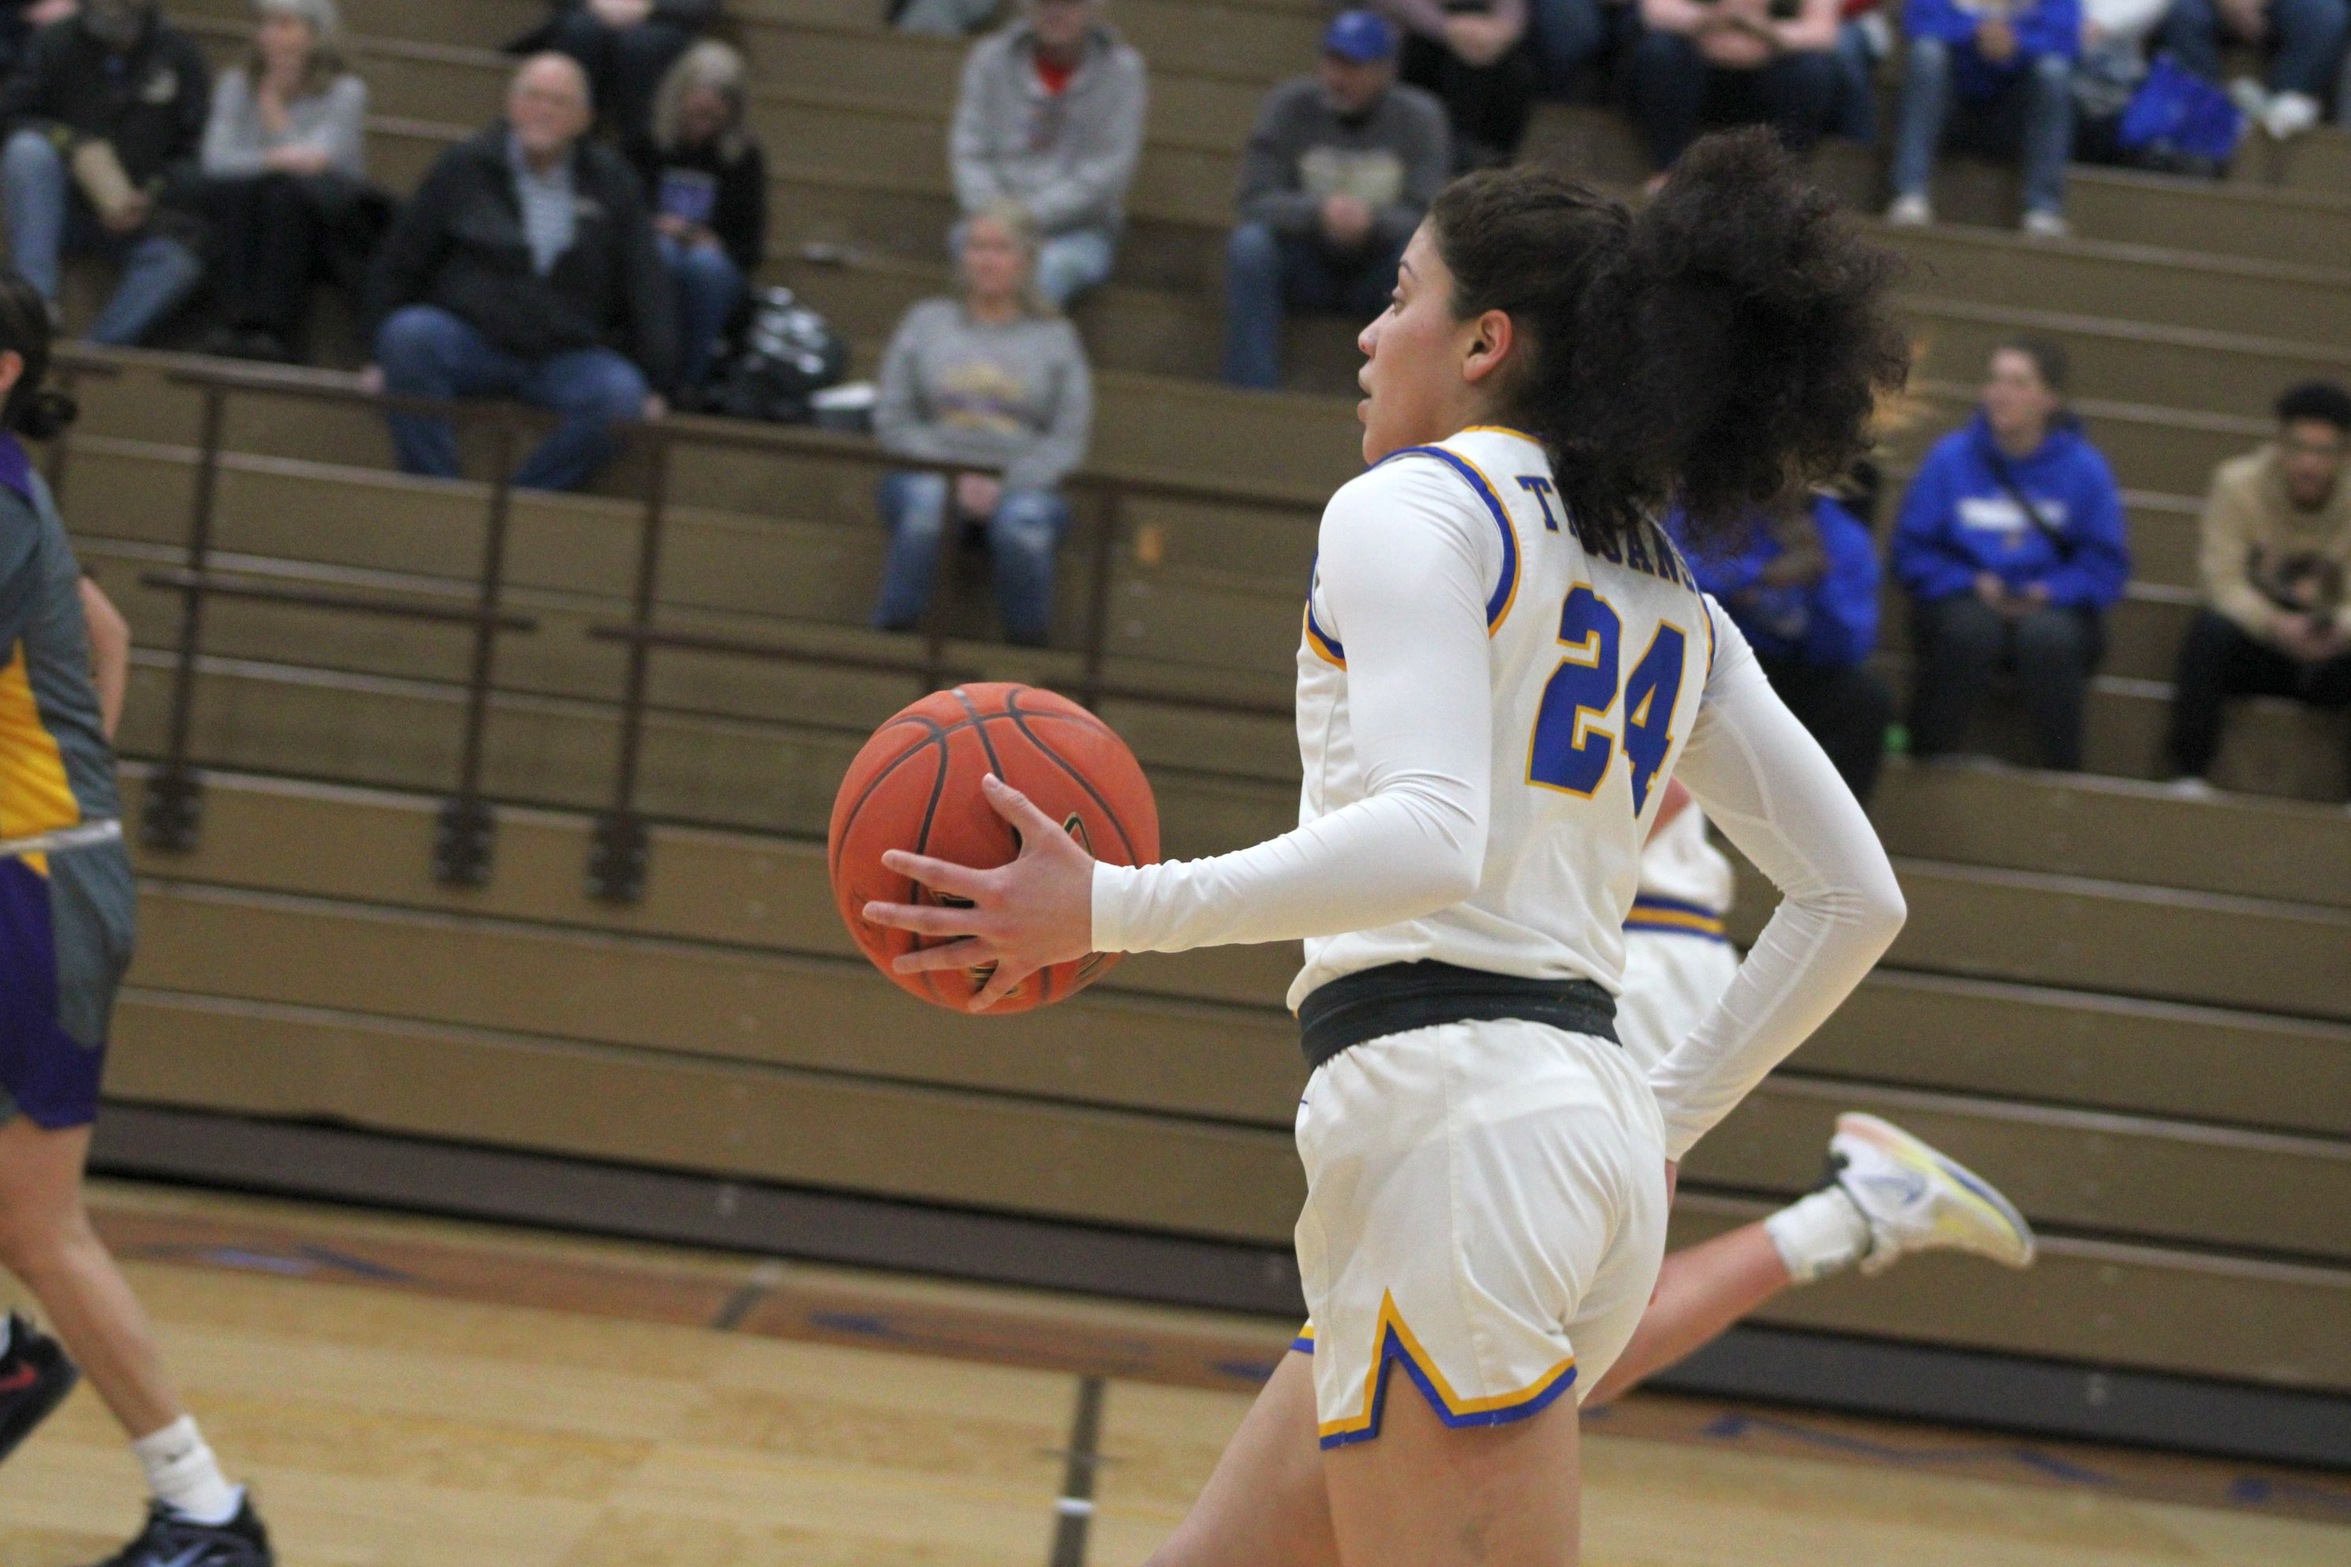 NIACC sophomore Audrey Martinez-Stewart moves the ball up the court in Wednesday's game against Ellsworth.